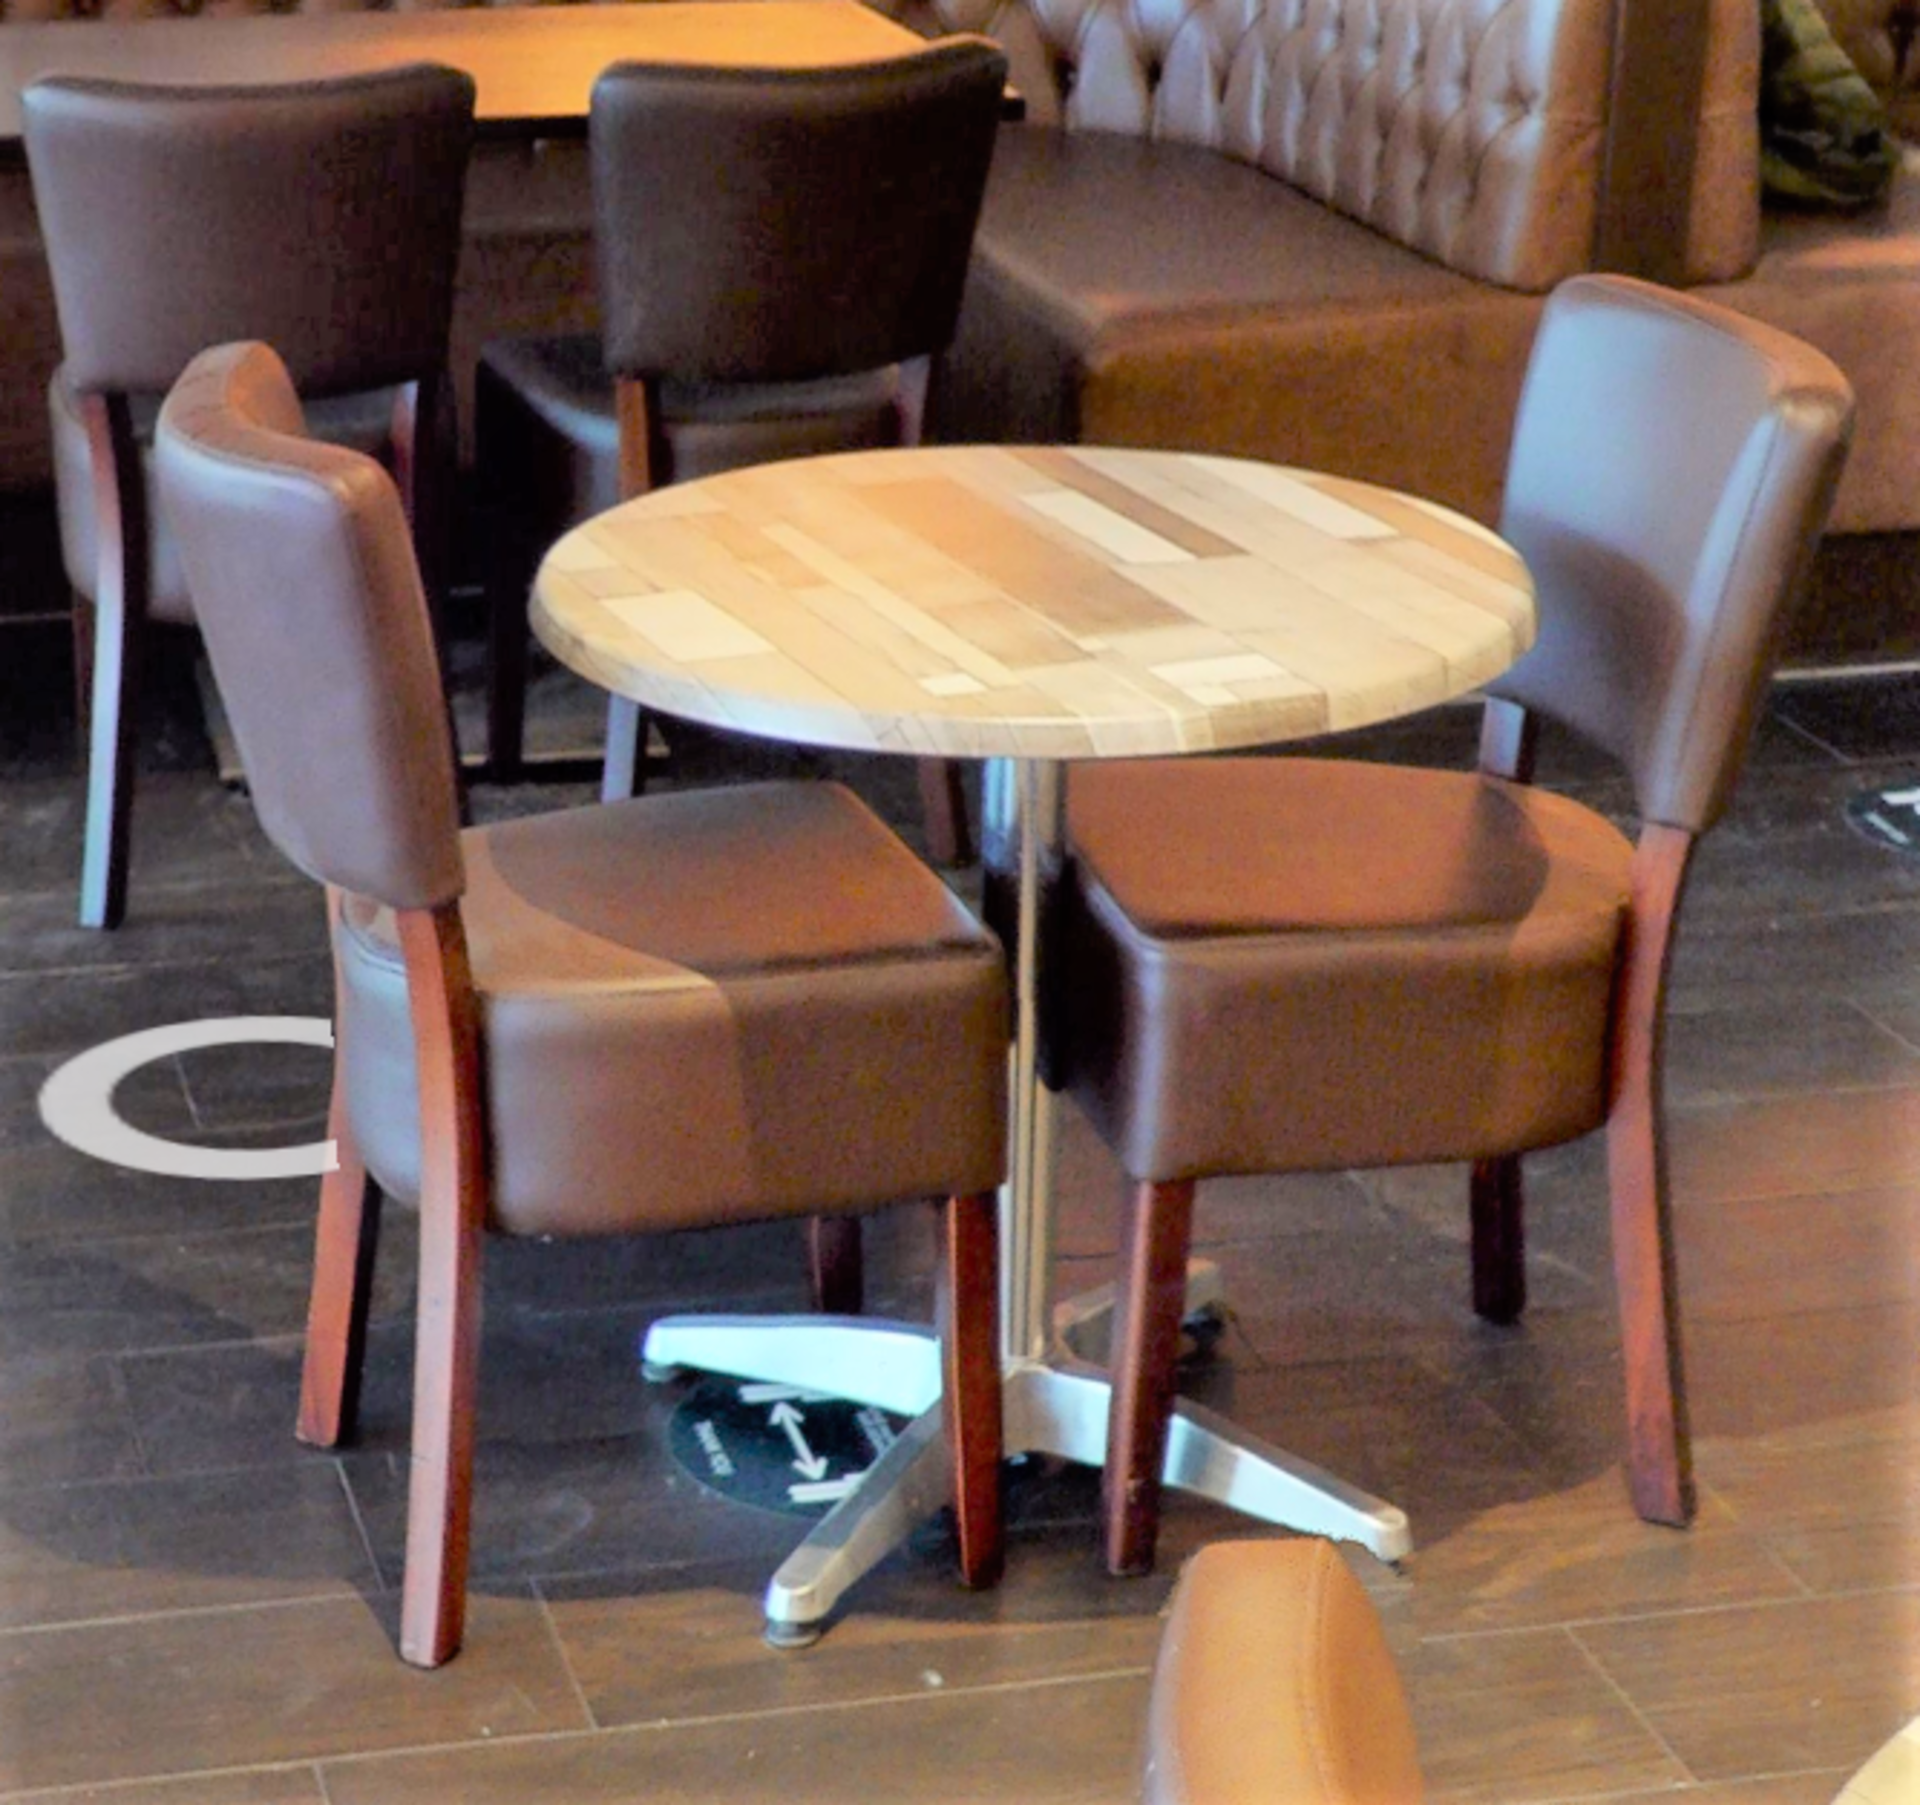 8 x Restaurant Chairs With Brown Leather Seat Pads and Padded Backrests - CL701 - Location: Ashton - Image 5 of 9